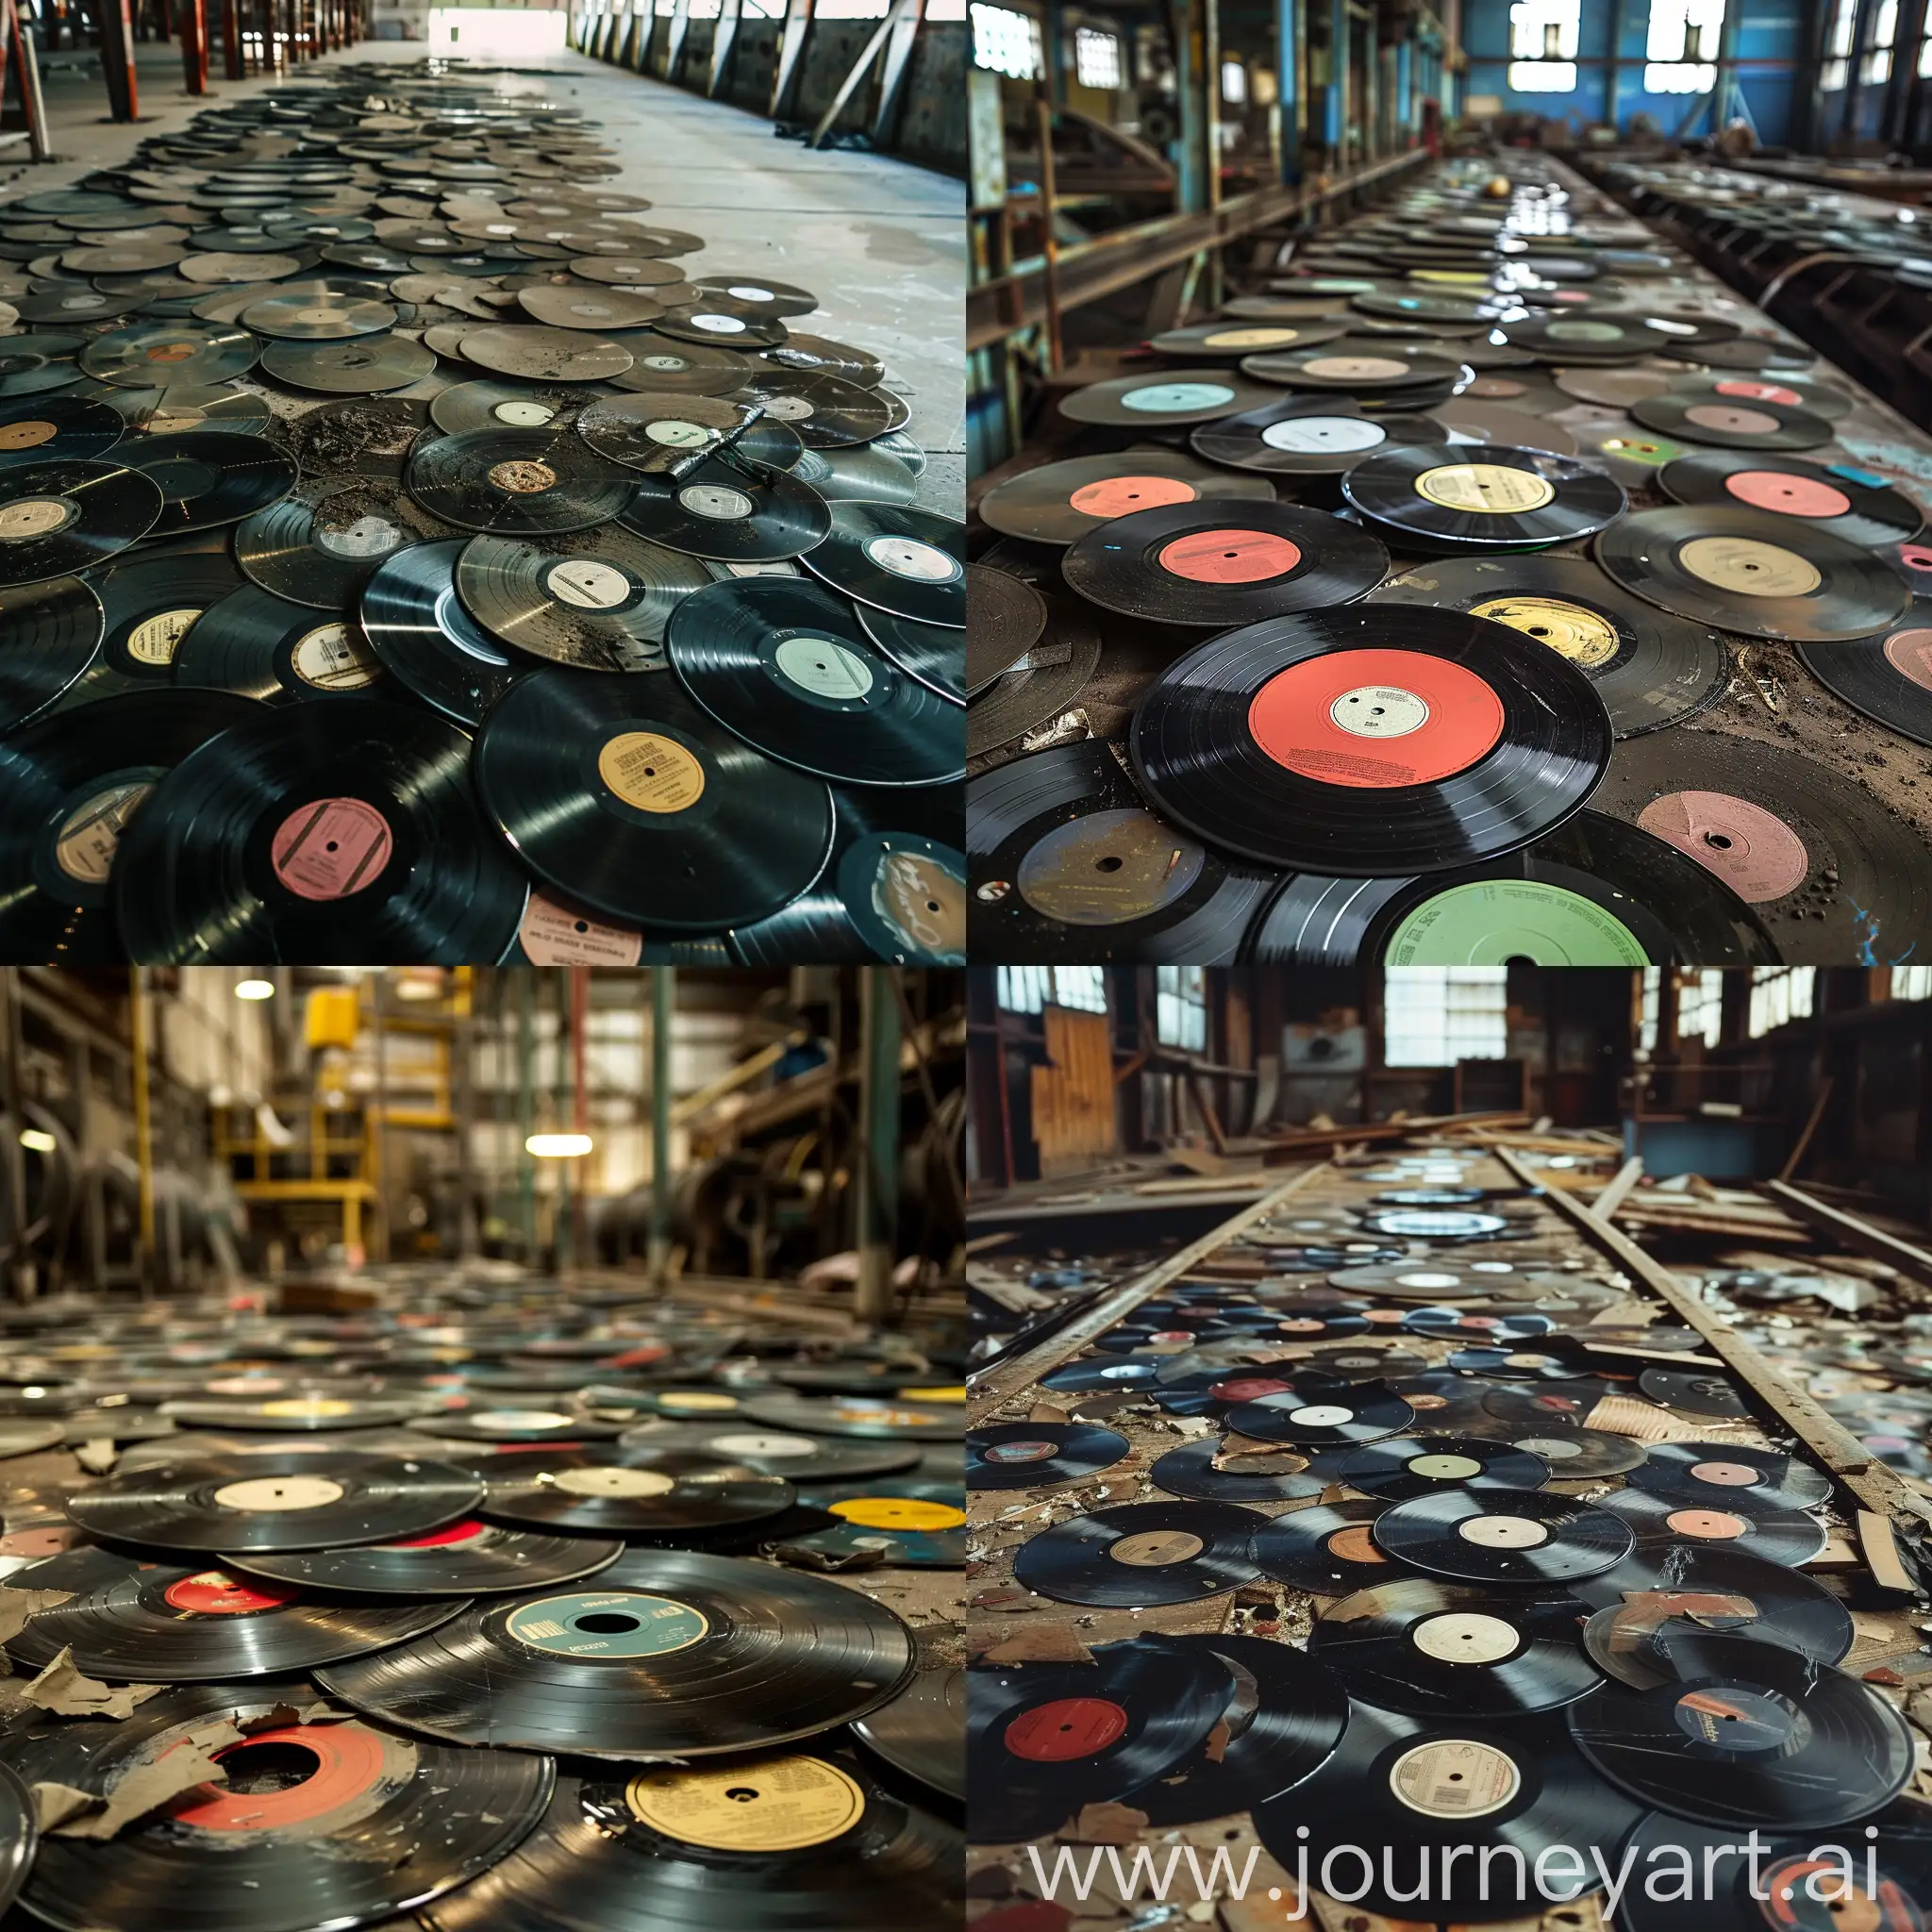 Abandoned-Industrial-Factory-Vintage-Vinyl-Records-Scatter-in-Decay